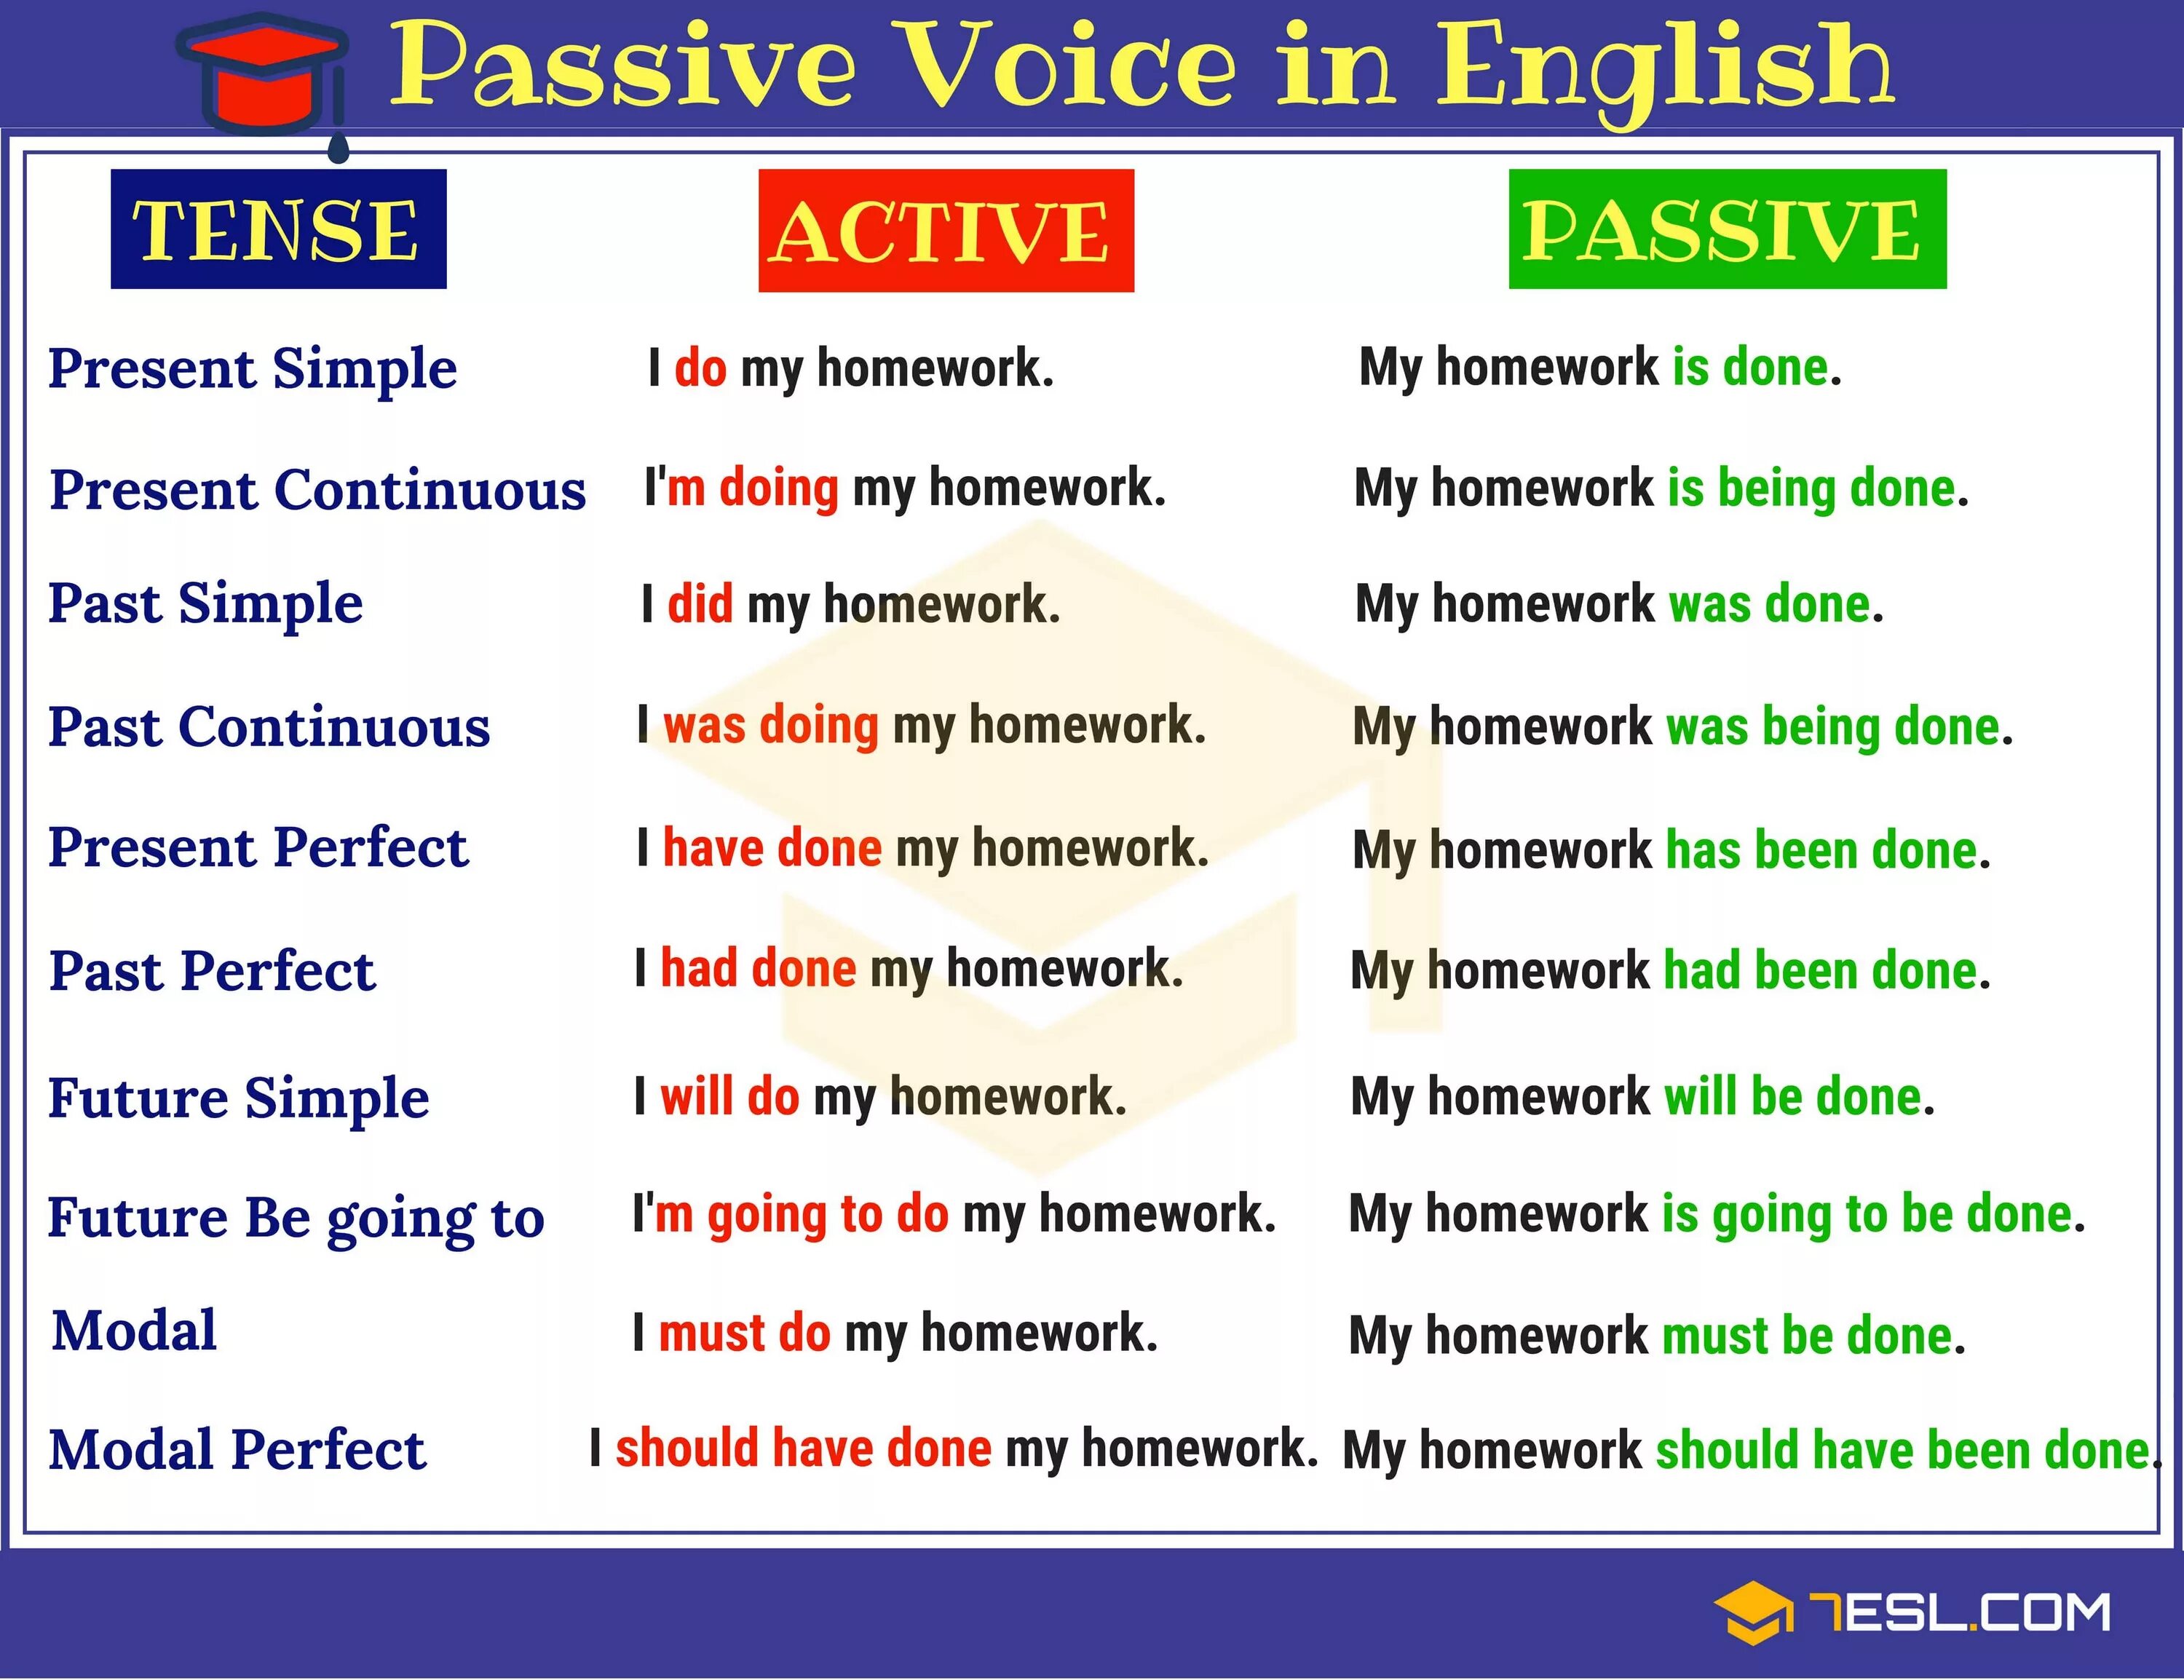 Was written какое время. Active and Passive Voice in English Grammar. English Tenses Active and Passive. Active Passive Voice в английском языке. English Tenses Passive Voice.